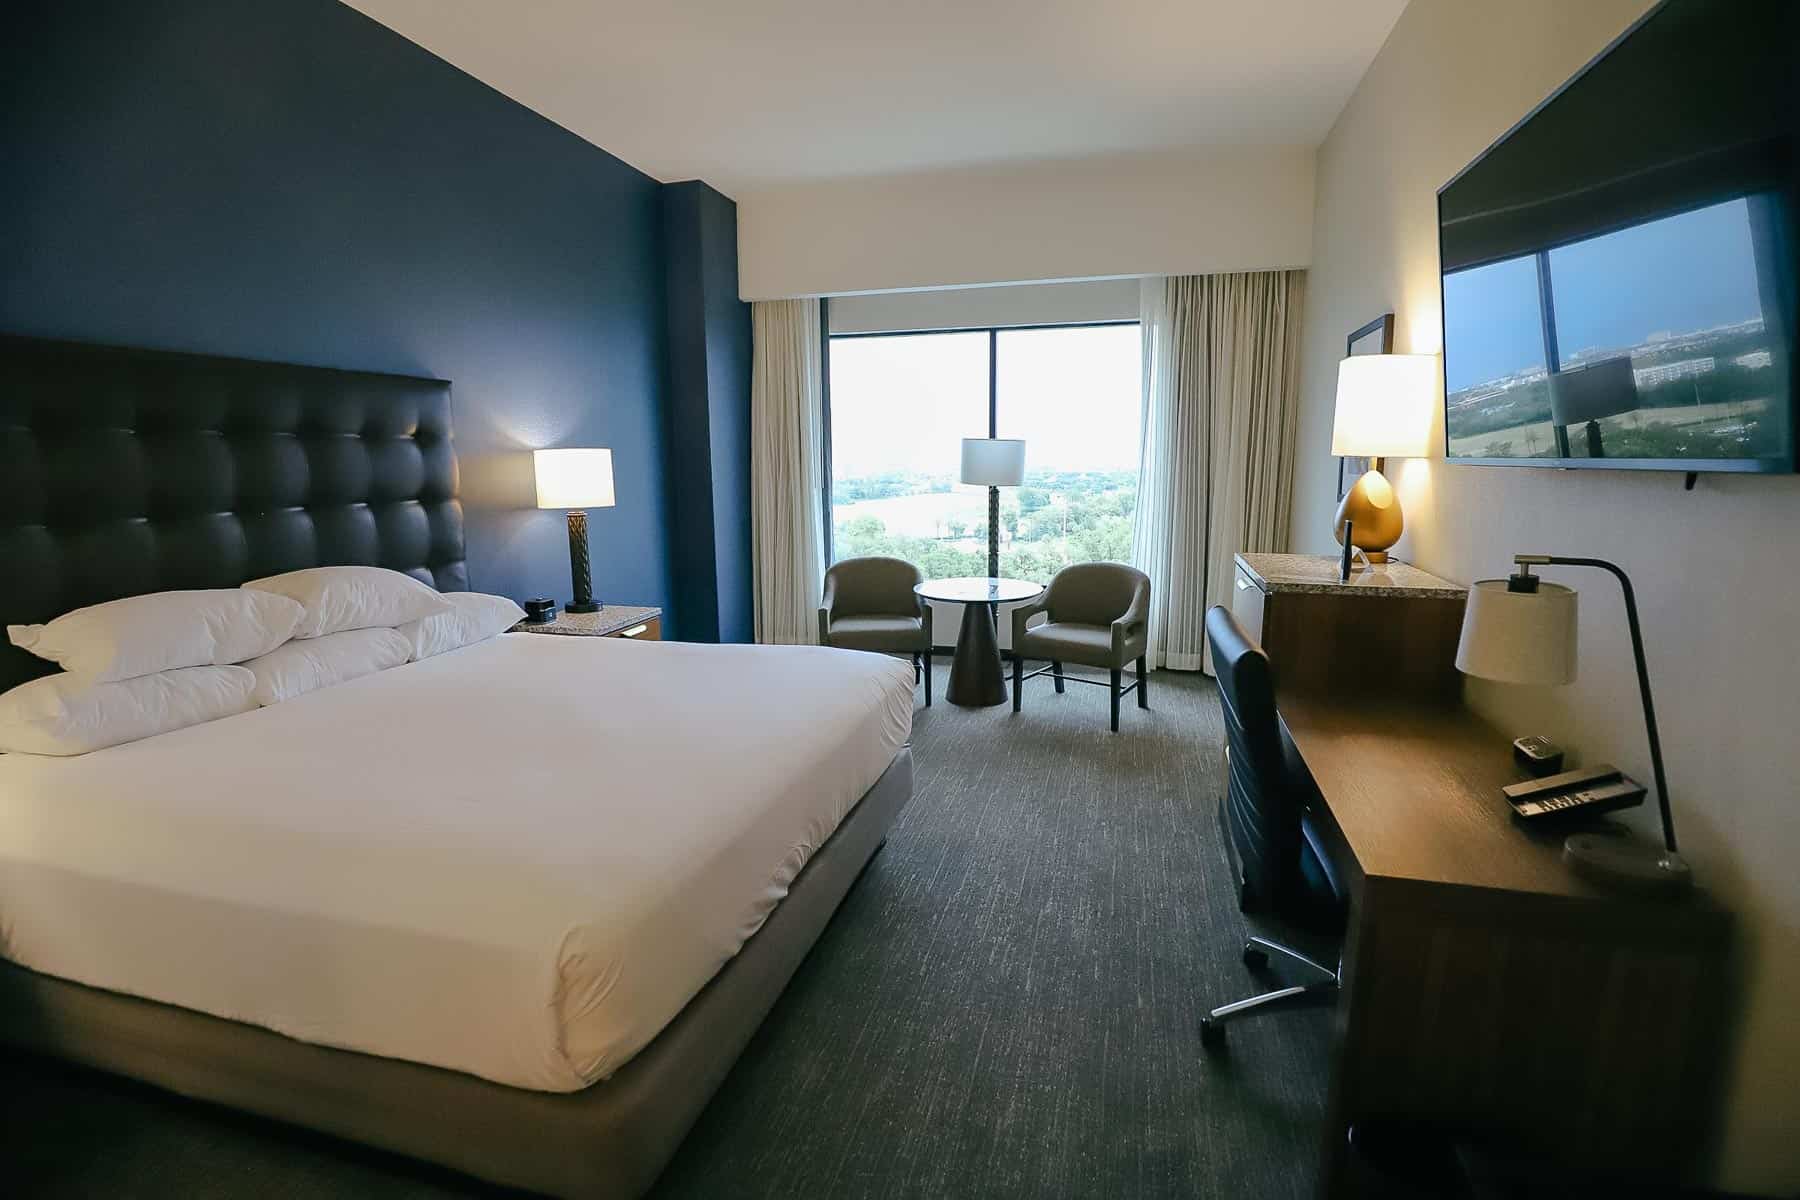 King-size guest room at the Drury Hotel Disney Springs location.